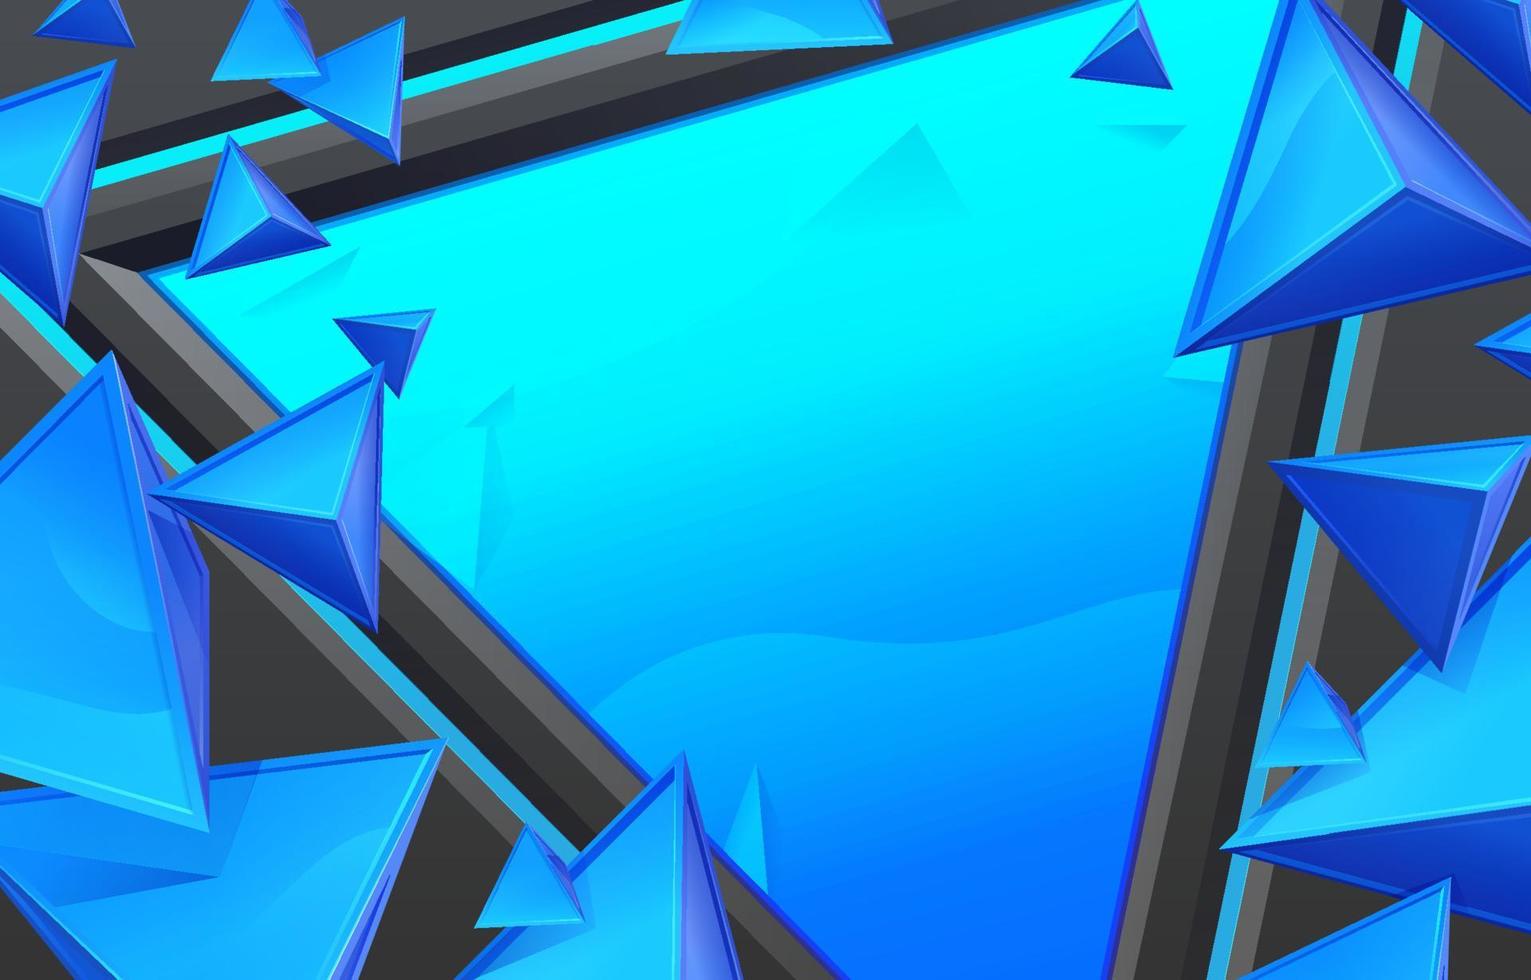 Triangular Abstract Background with Blue and Black Colors vector